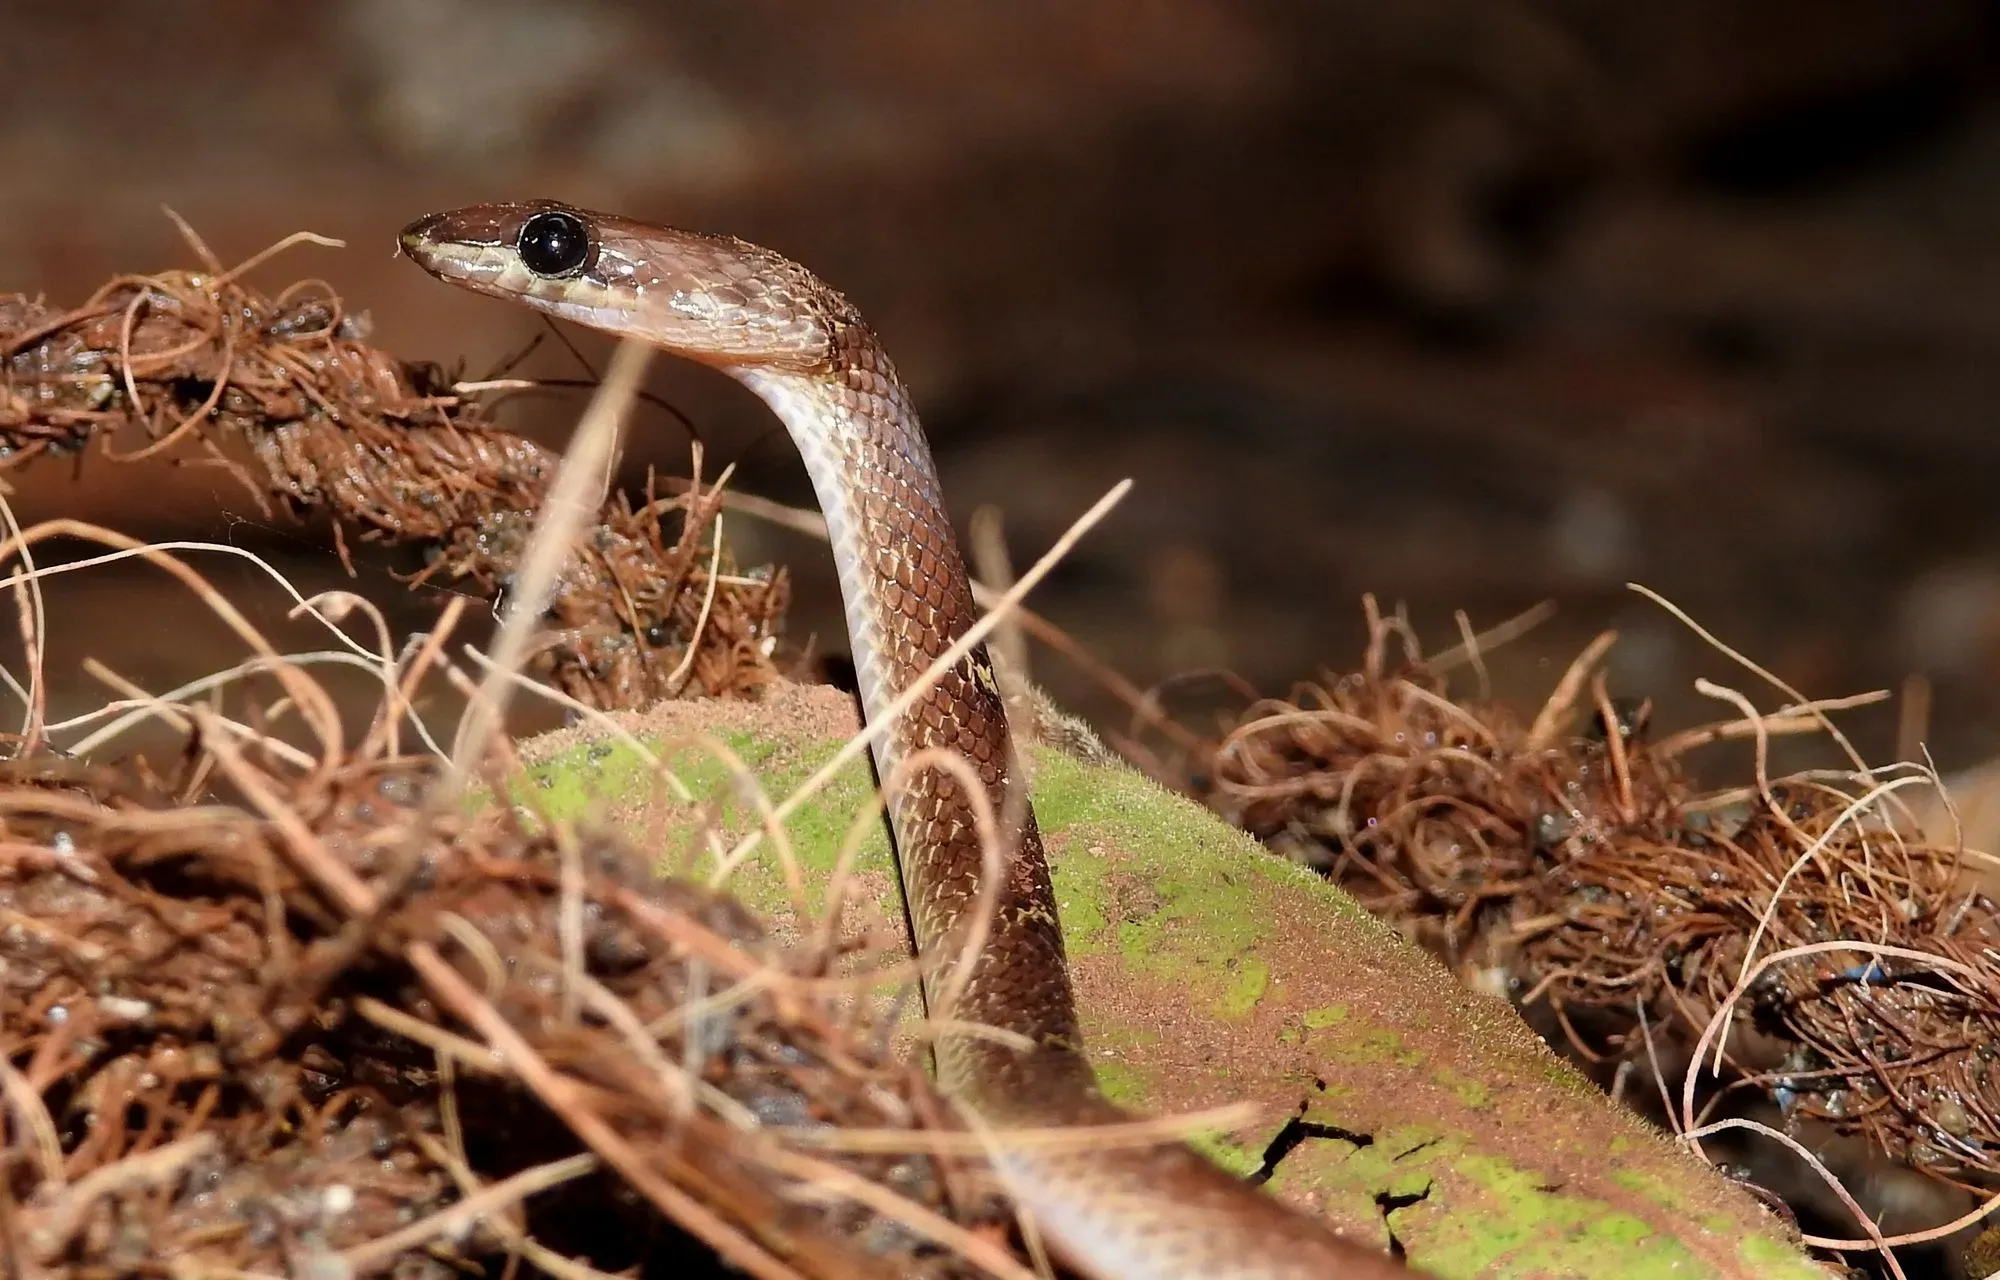 The common wolf snake's upper lip is enlarged, and the snout is broad and sunken.